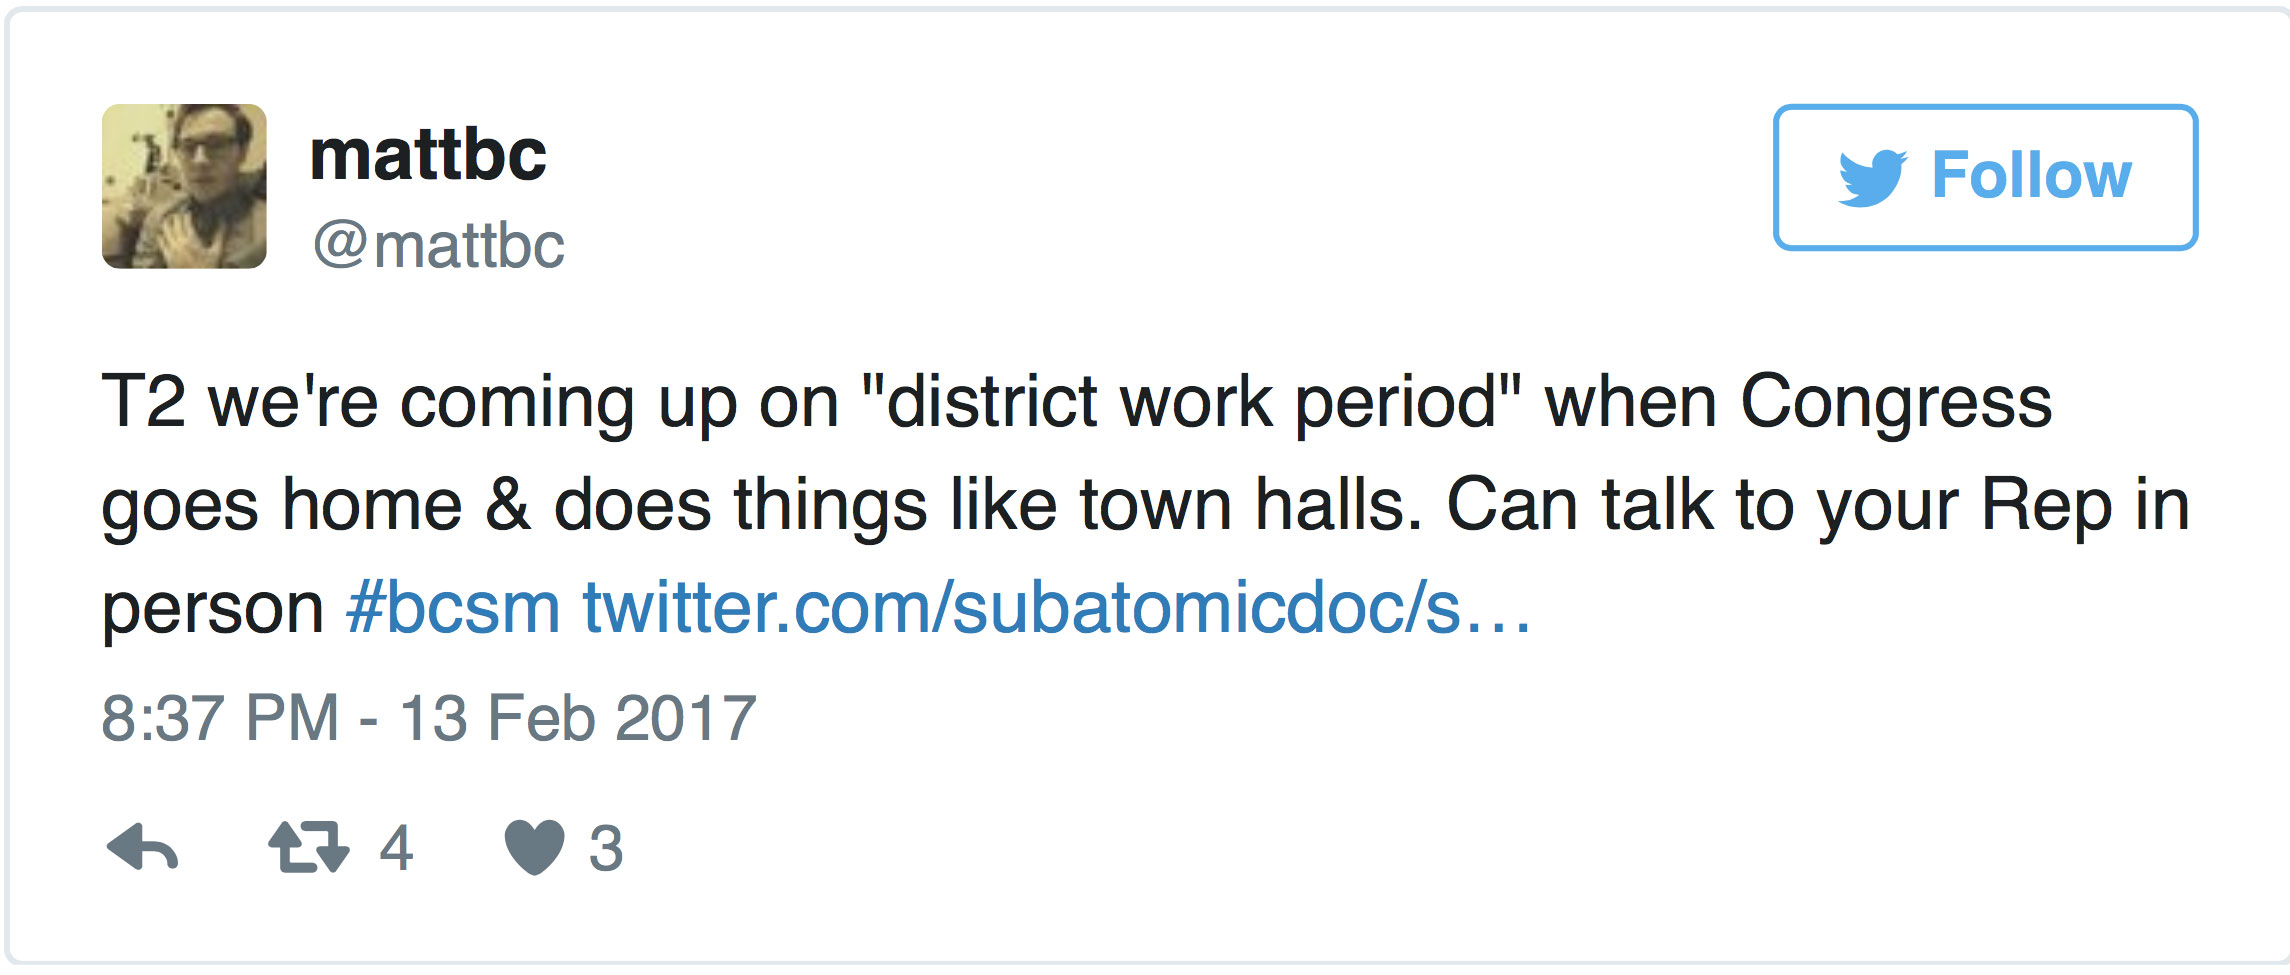 @mattbc T2 we're coming up on "district work period" when Congress goes home &amp; does things like town halls. Can talk to your Rep in person #bcsm twitter.com/subatomicdoc/s...